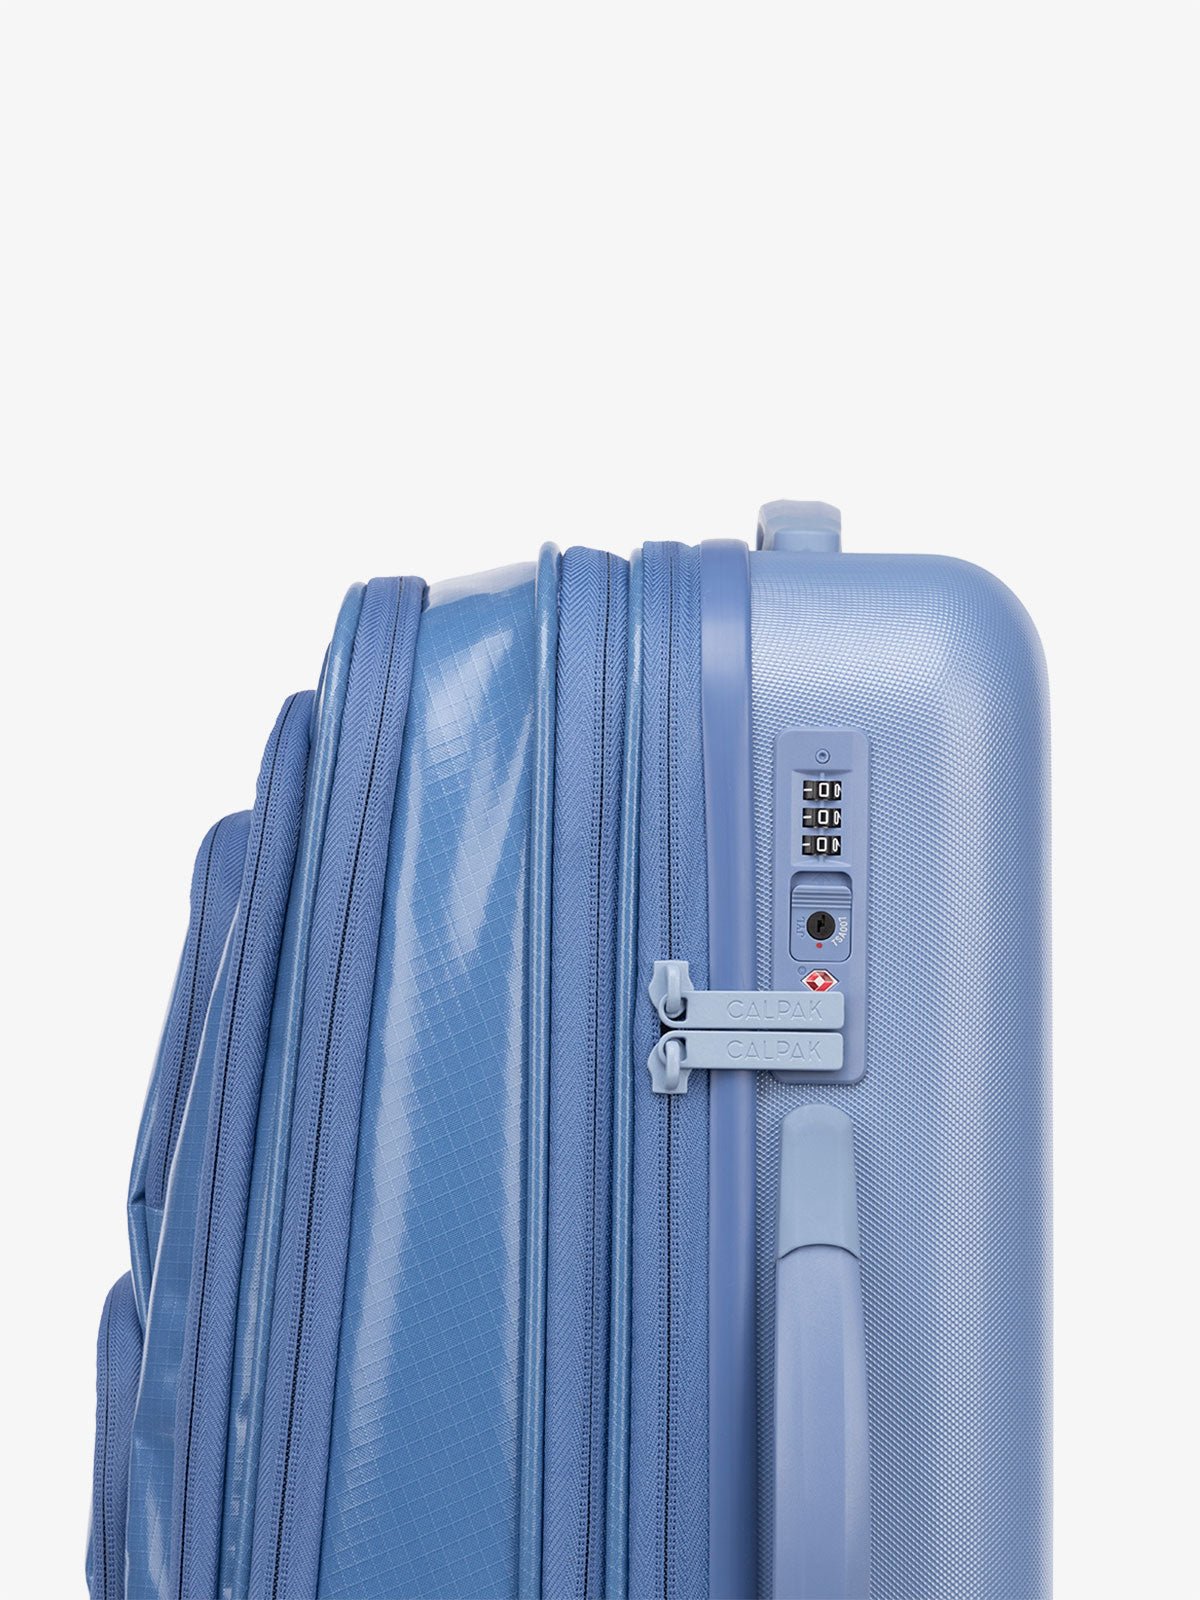 CALPAK Terra Carry-On Luggage with hybrid exterior and TSA lock in glacier